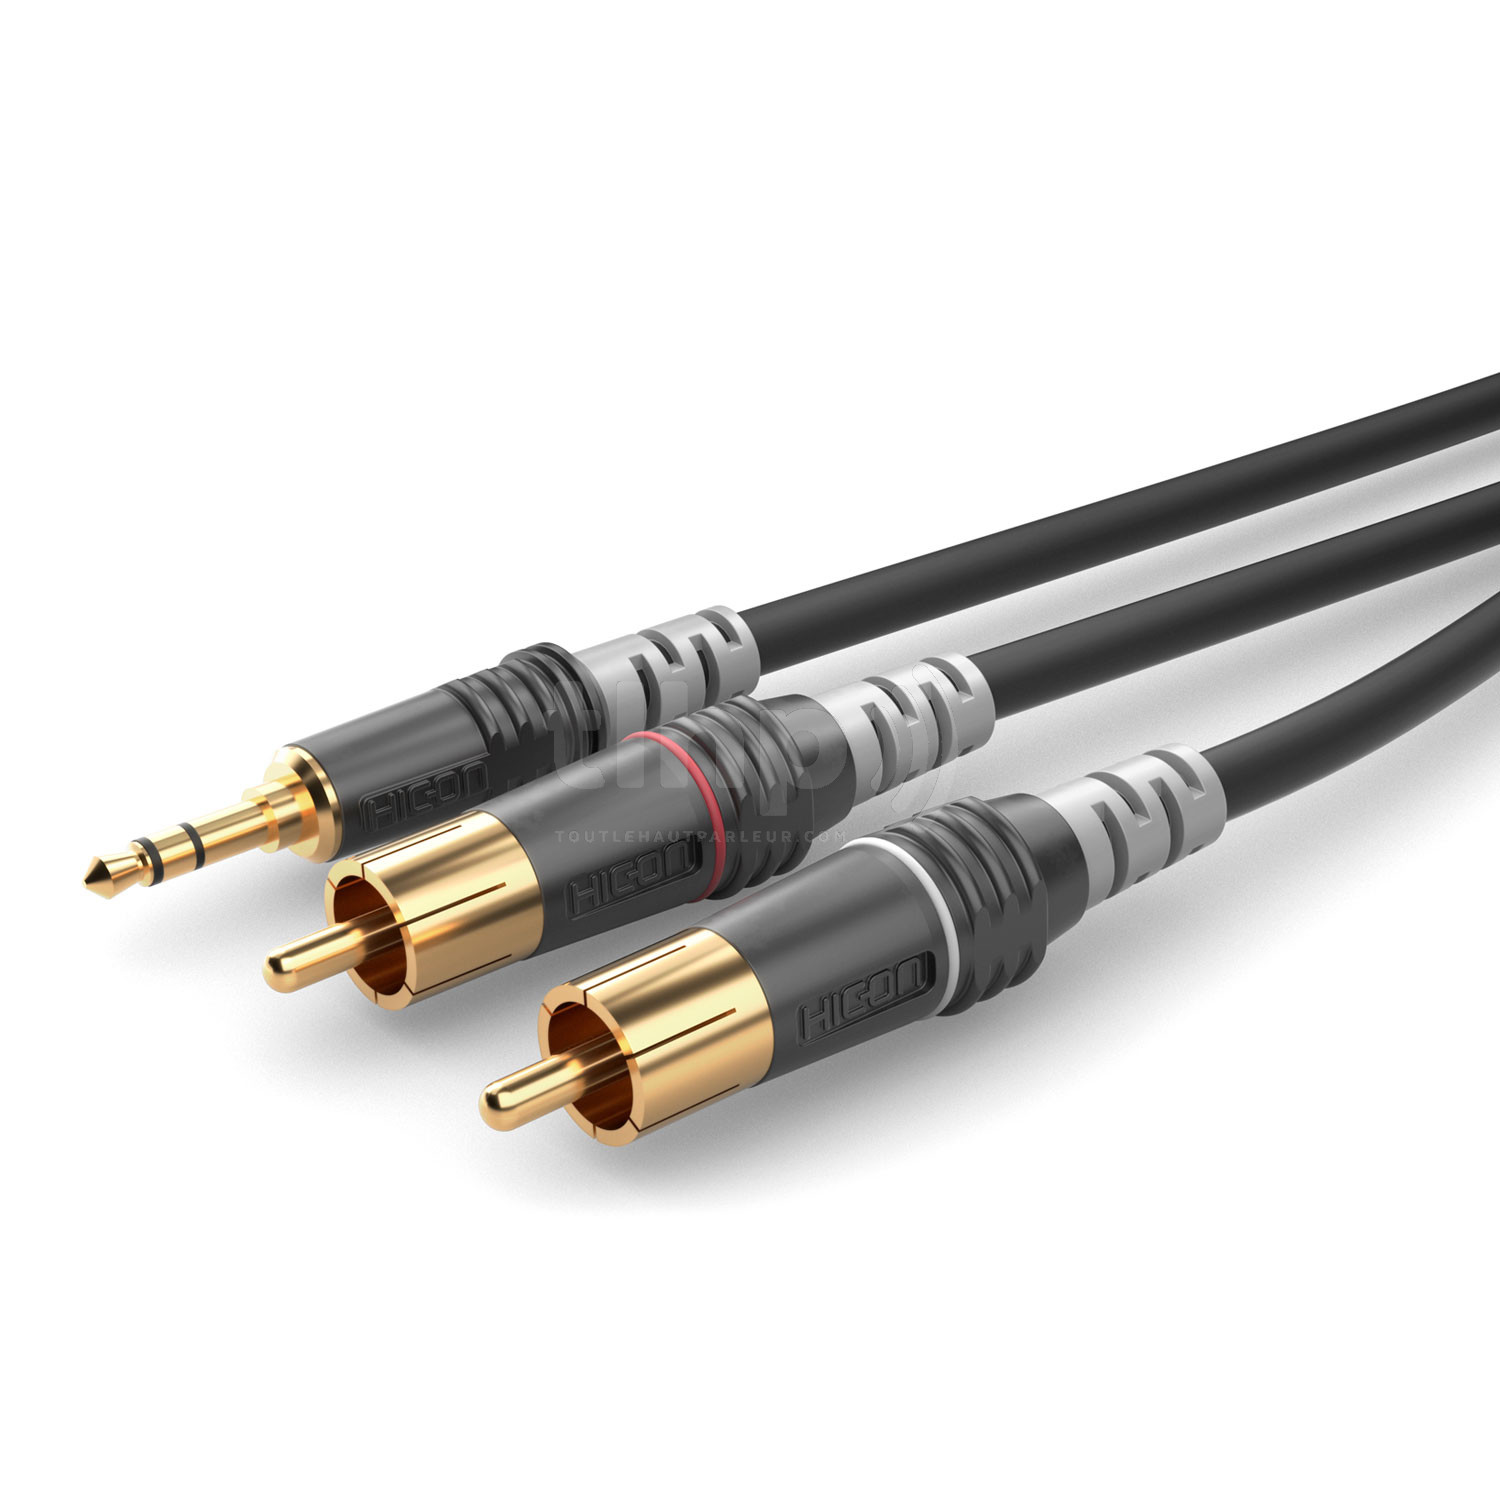 0.9m Y audio cable, with 3.5 mm stereo mini Jack to double 6.35 mm mono Jack,  Sommercable HBA-3S62, black, with Hicon gold plated contact connectors